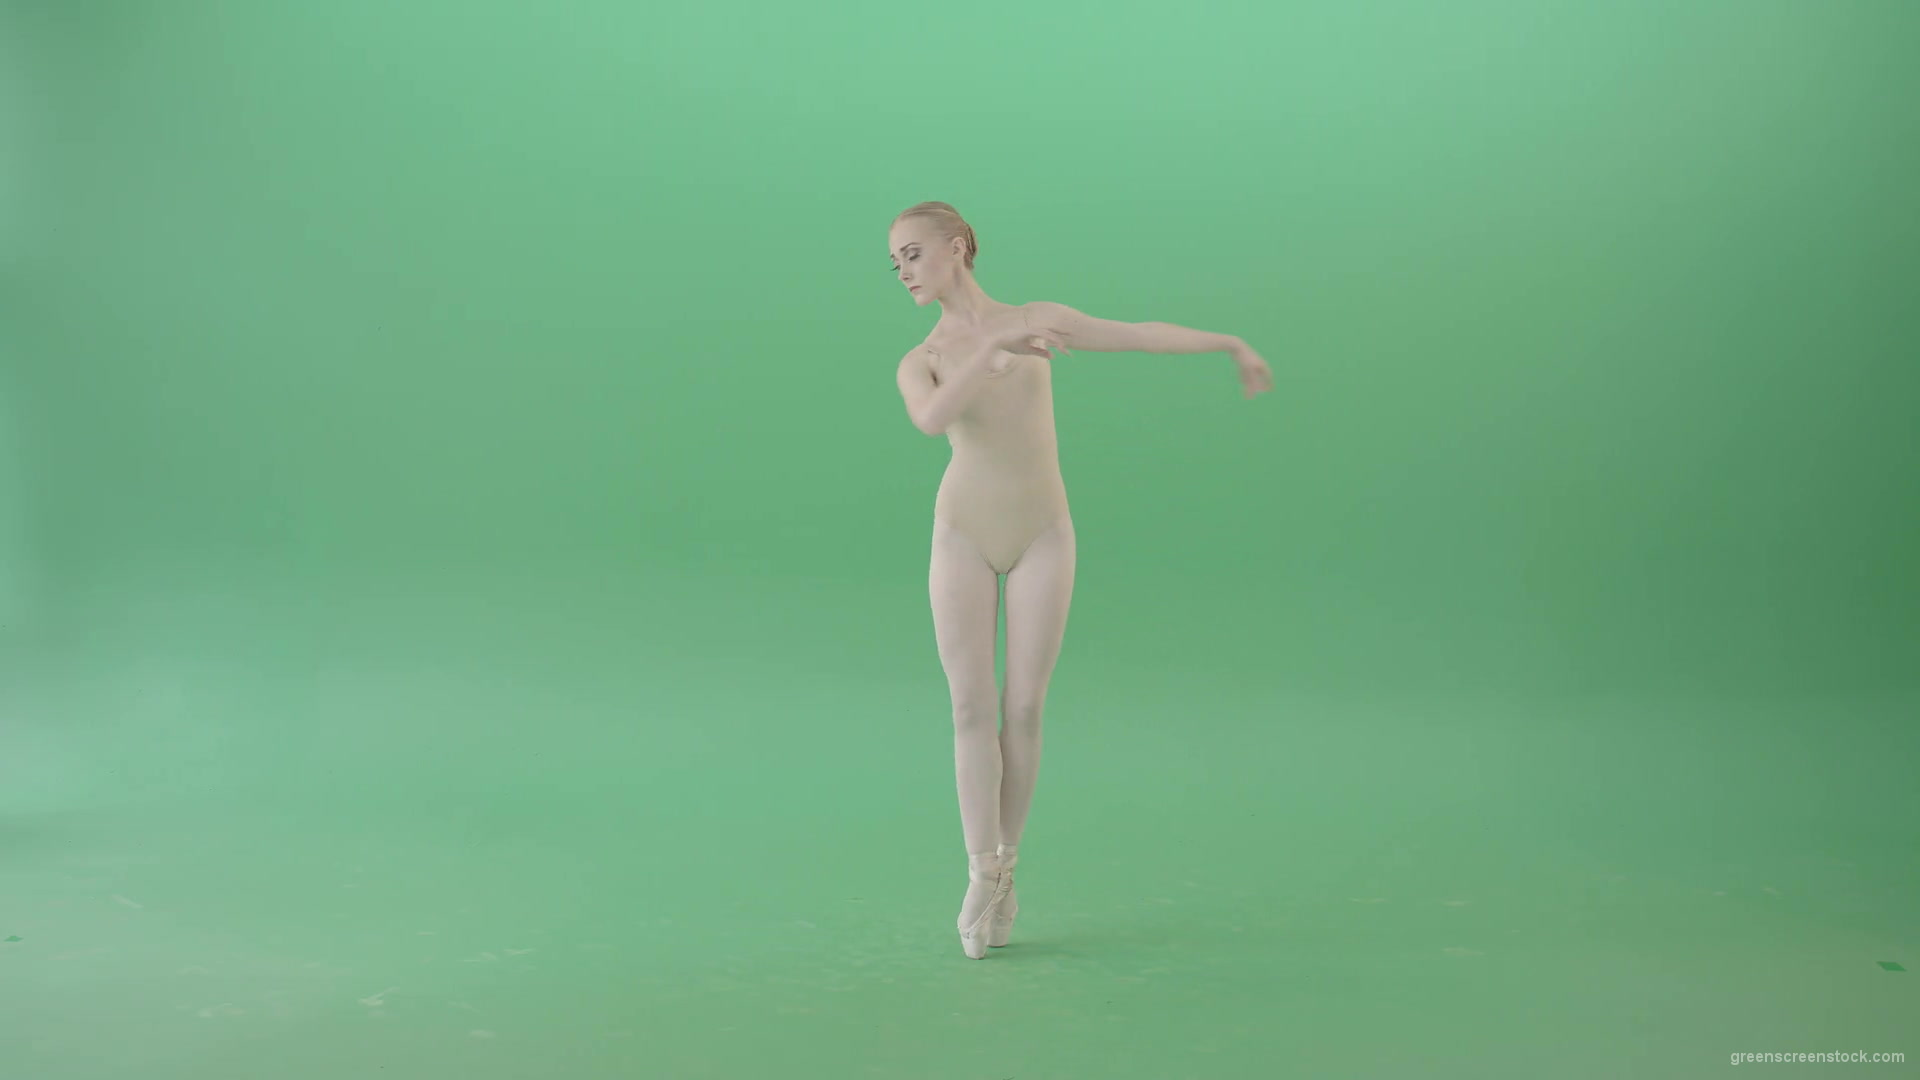 Ballet-dancer-woman-spinning-in-body-color-outfit-isolated-on-green-screen-4K-Video-Footage-1920_002 Green Screen Stock